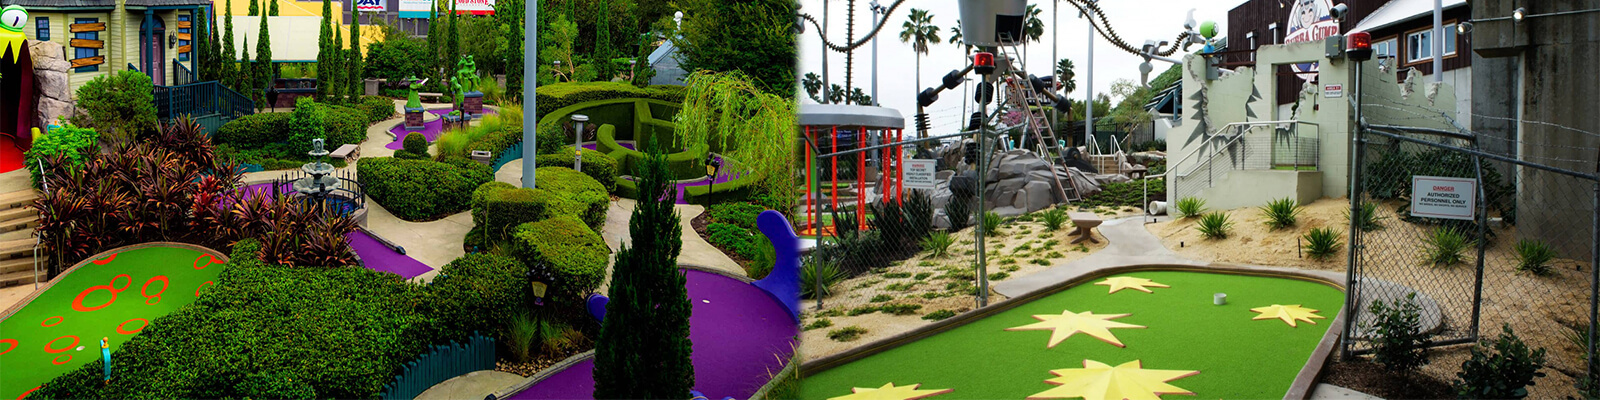 Hollywood Drive-In Golf Coupons